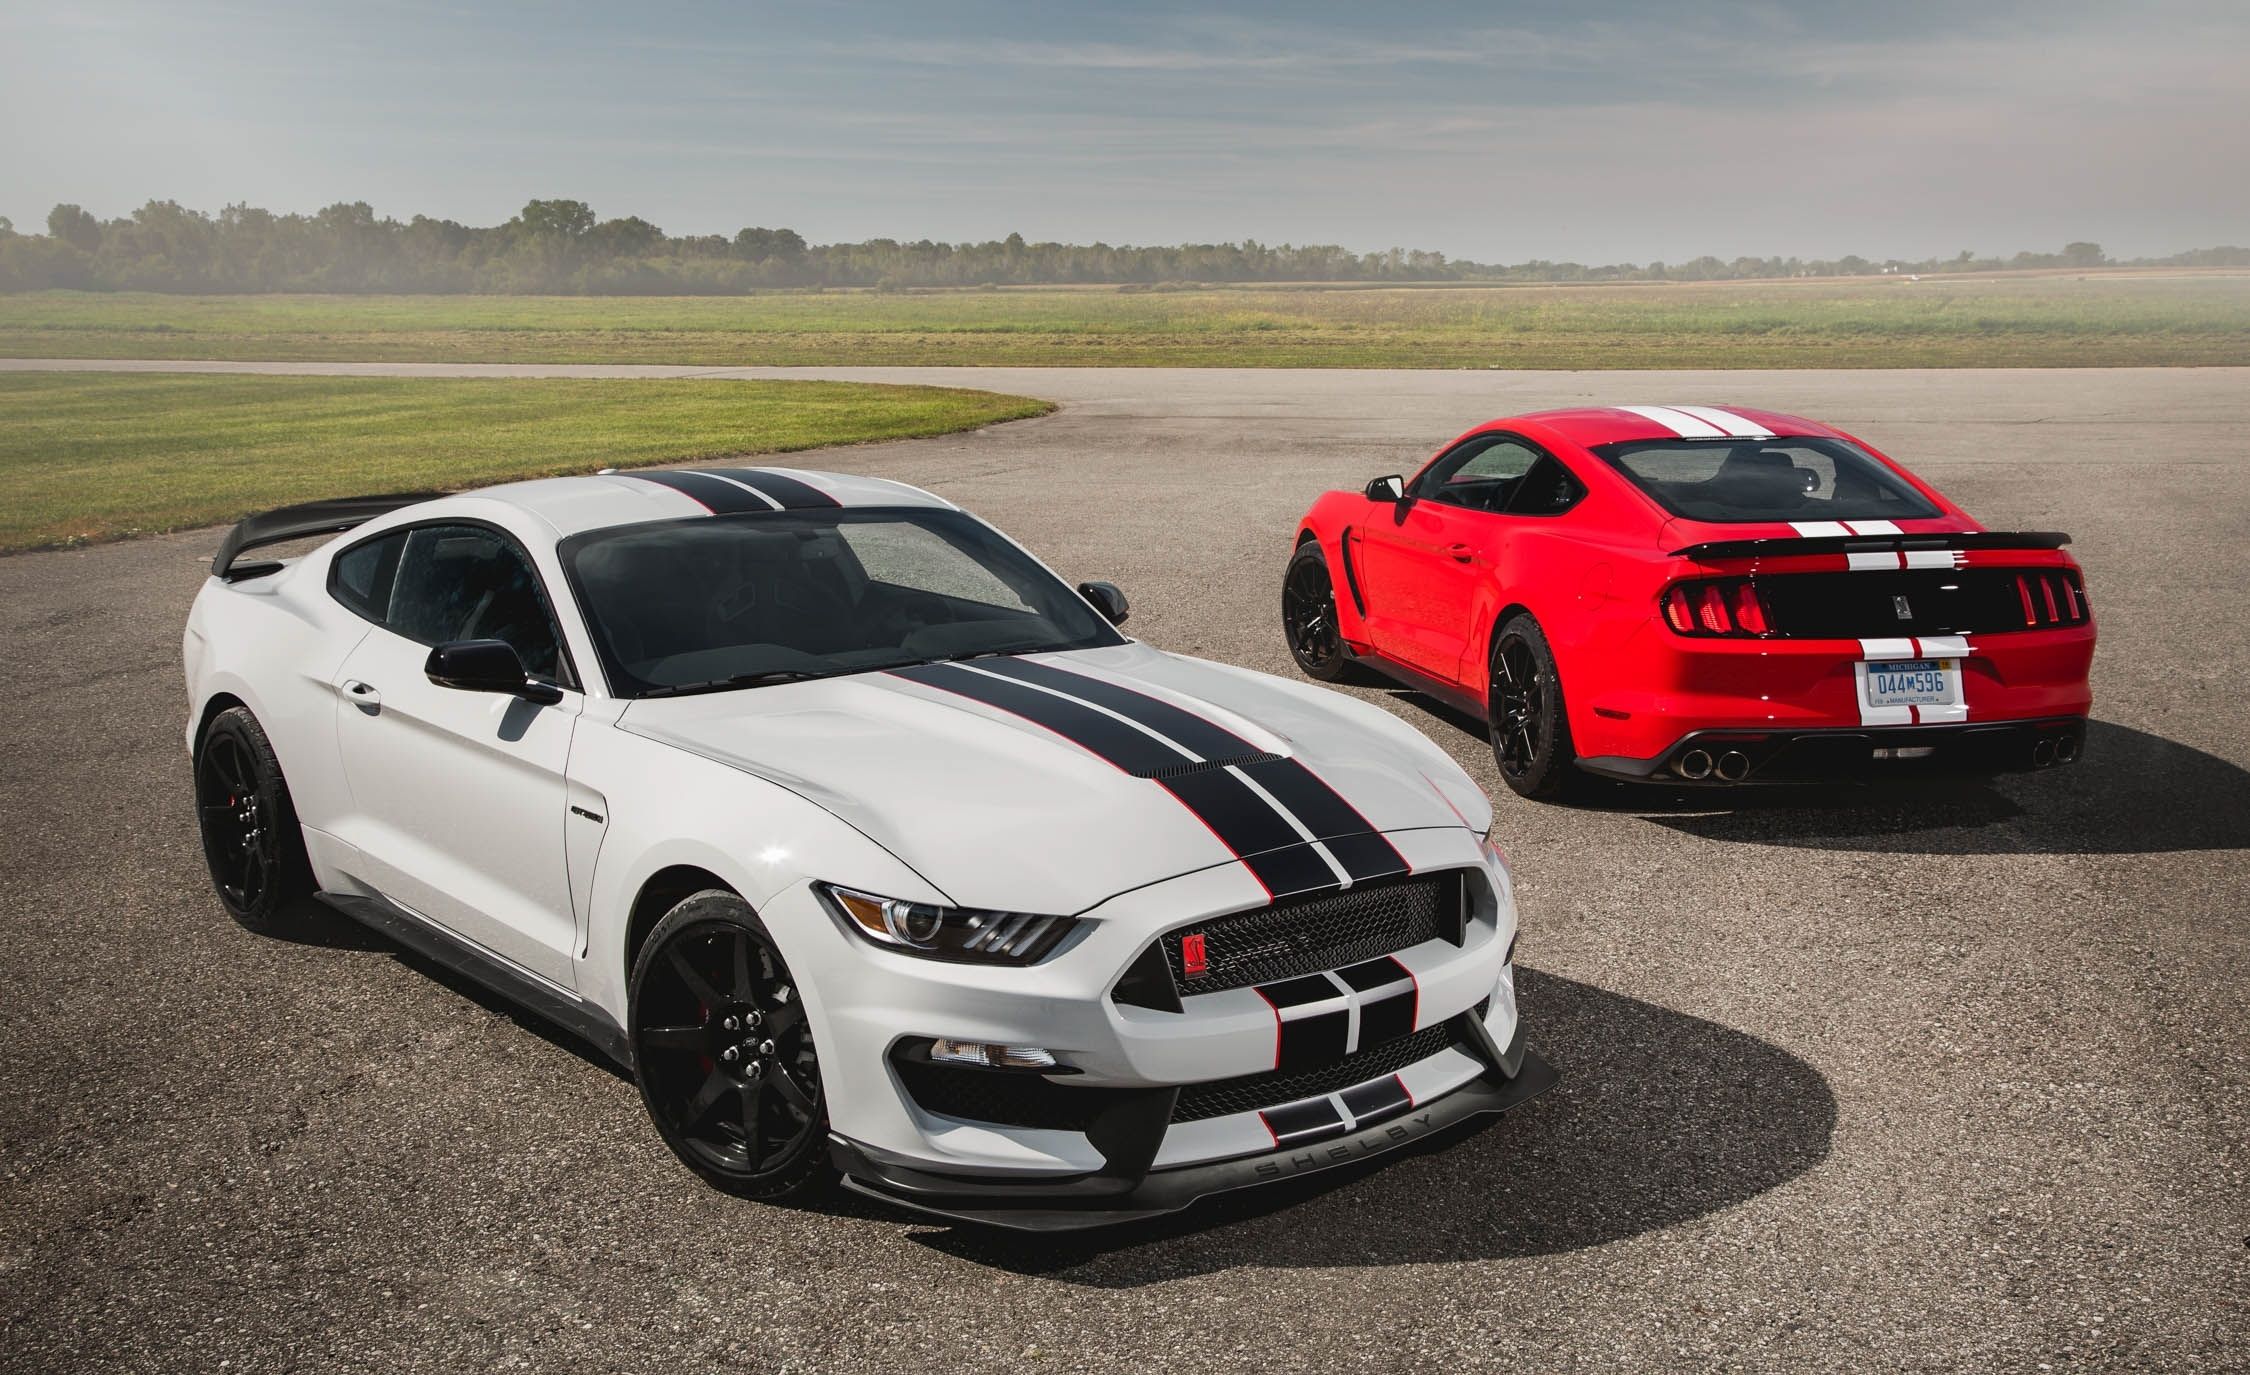 2019 Ford Mustang Shelby Gt350 Wallpapers - 2016 Gt350 Shelby Mustang , HD Wallpaper & Backgrounds